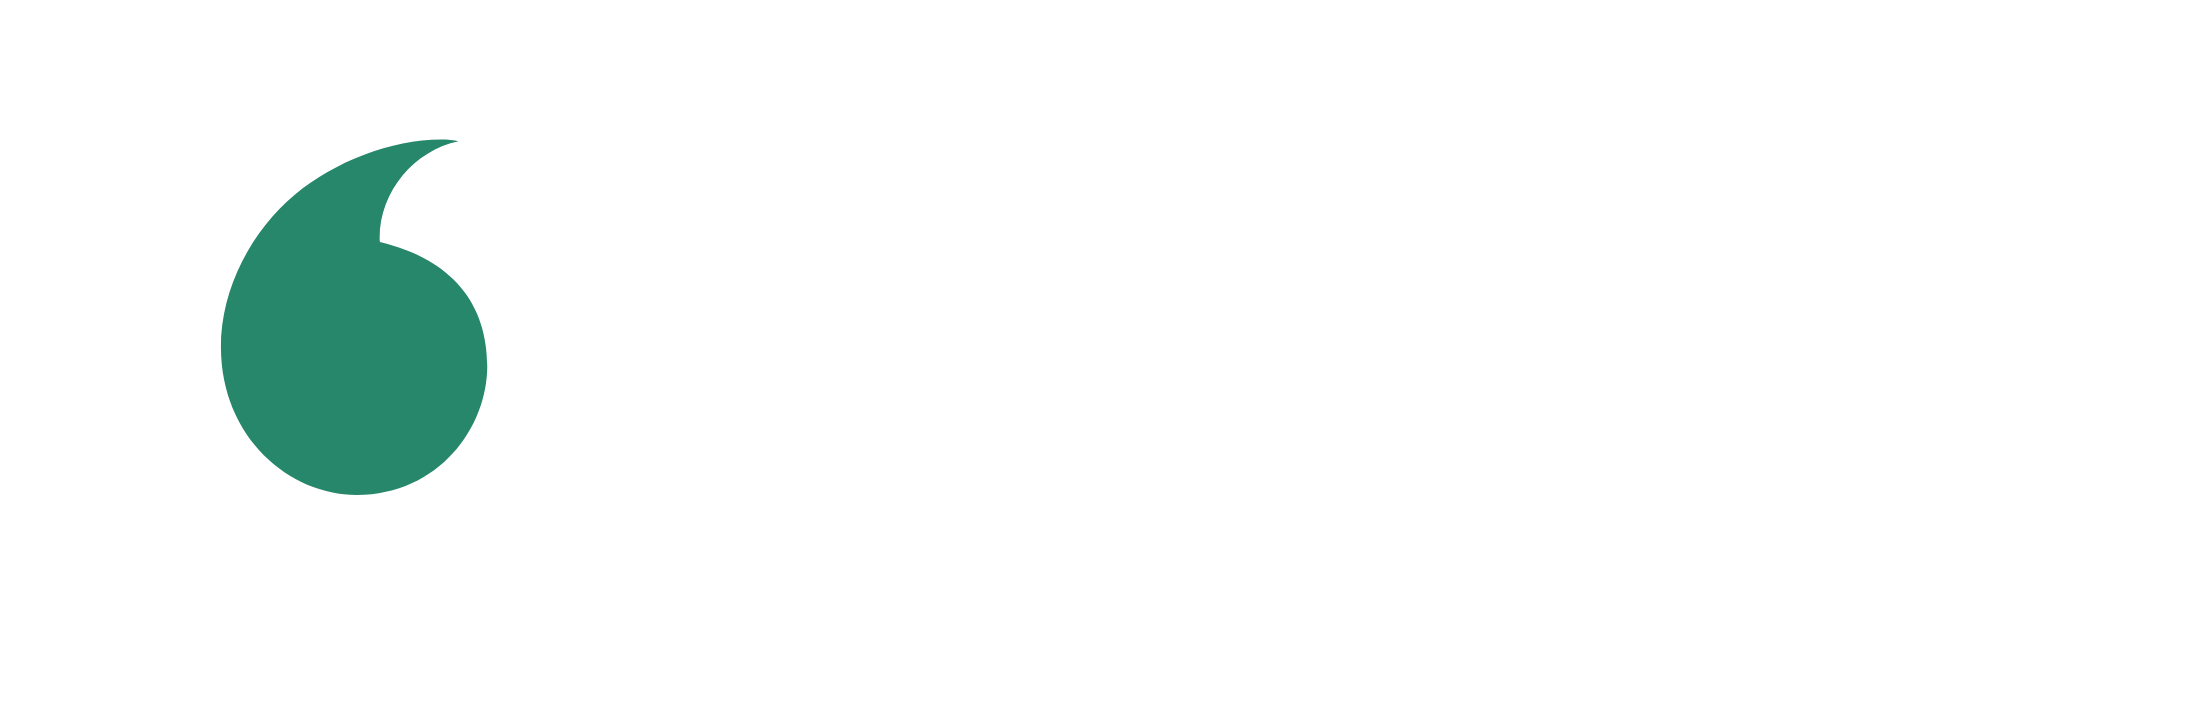 Vodafone logo with a white speech mark inside a green circle, followed by the brand name in lowercase.